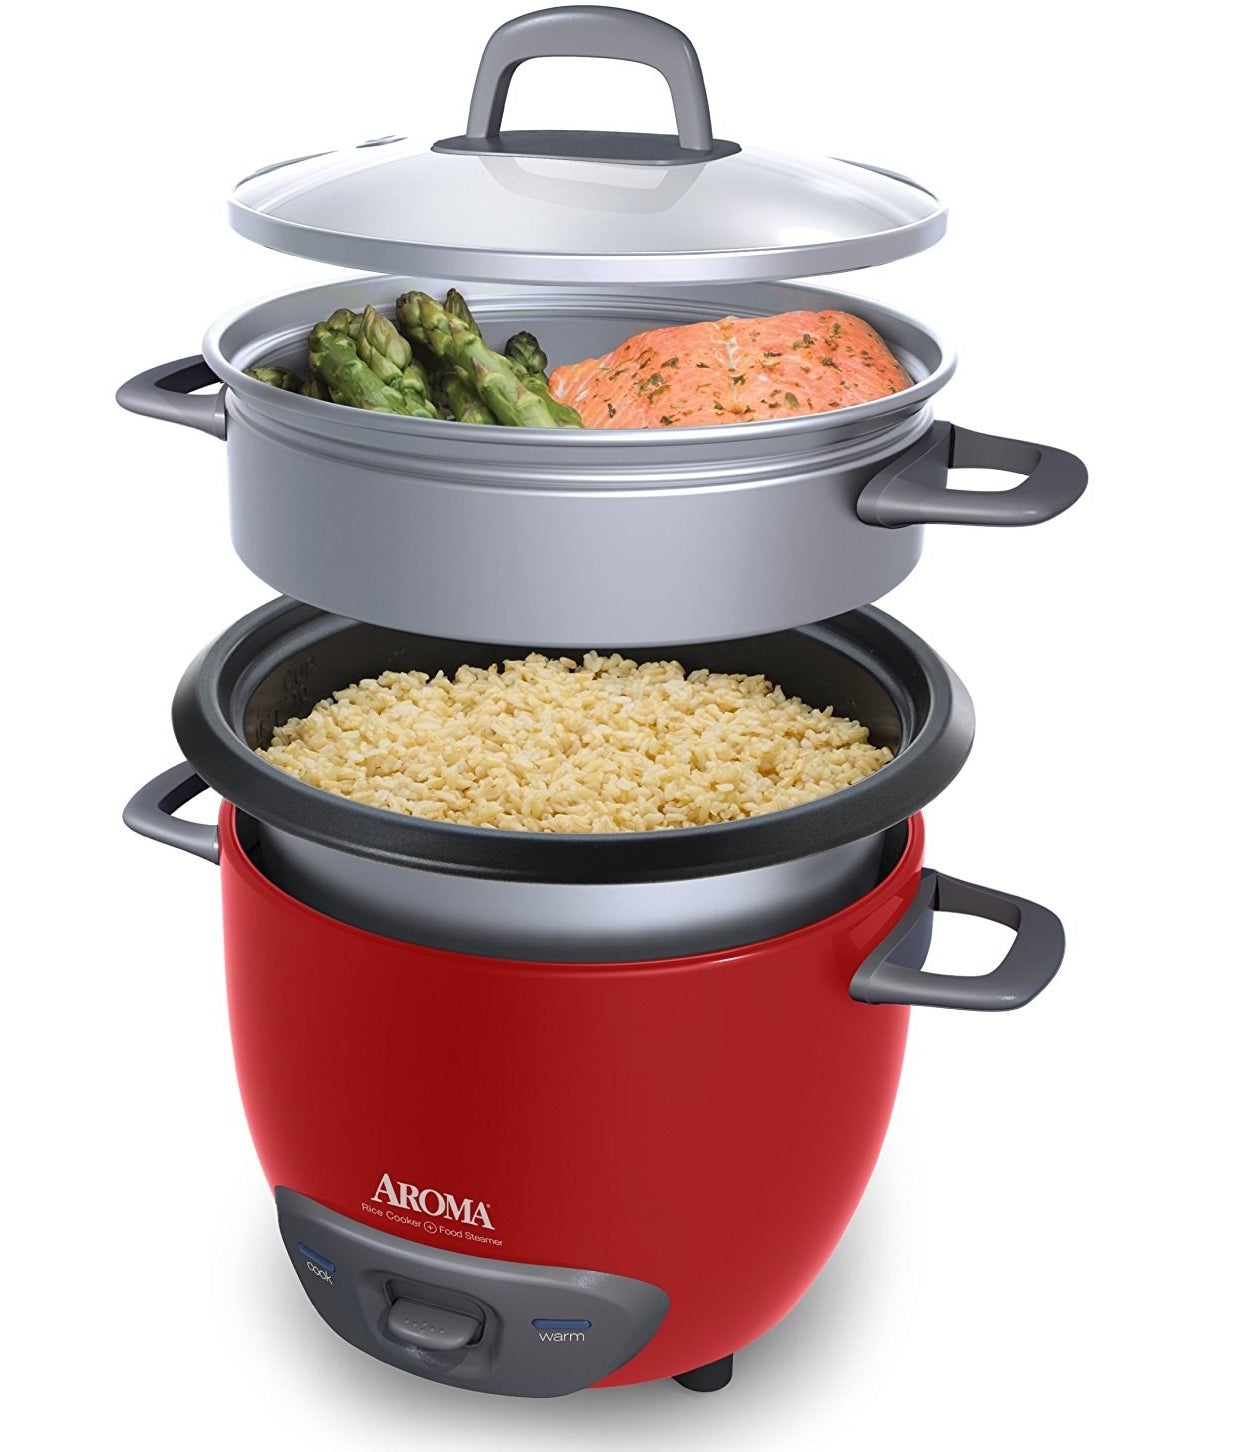 Dorm Room Appliances And Cooking Gadgets For New College Students